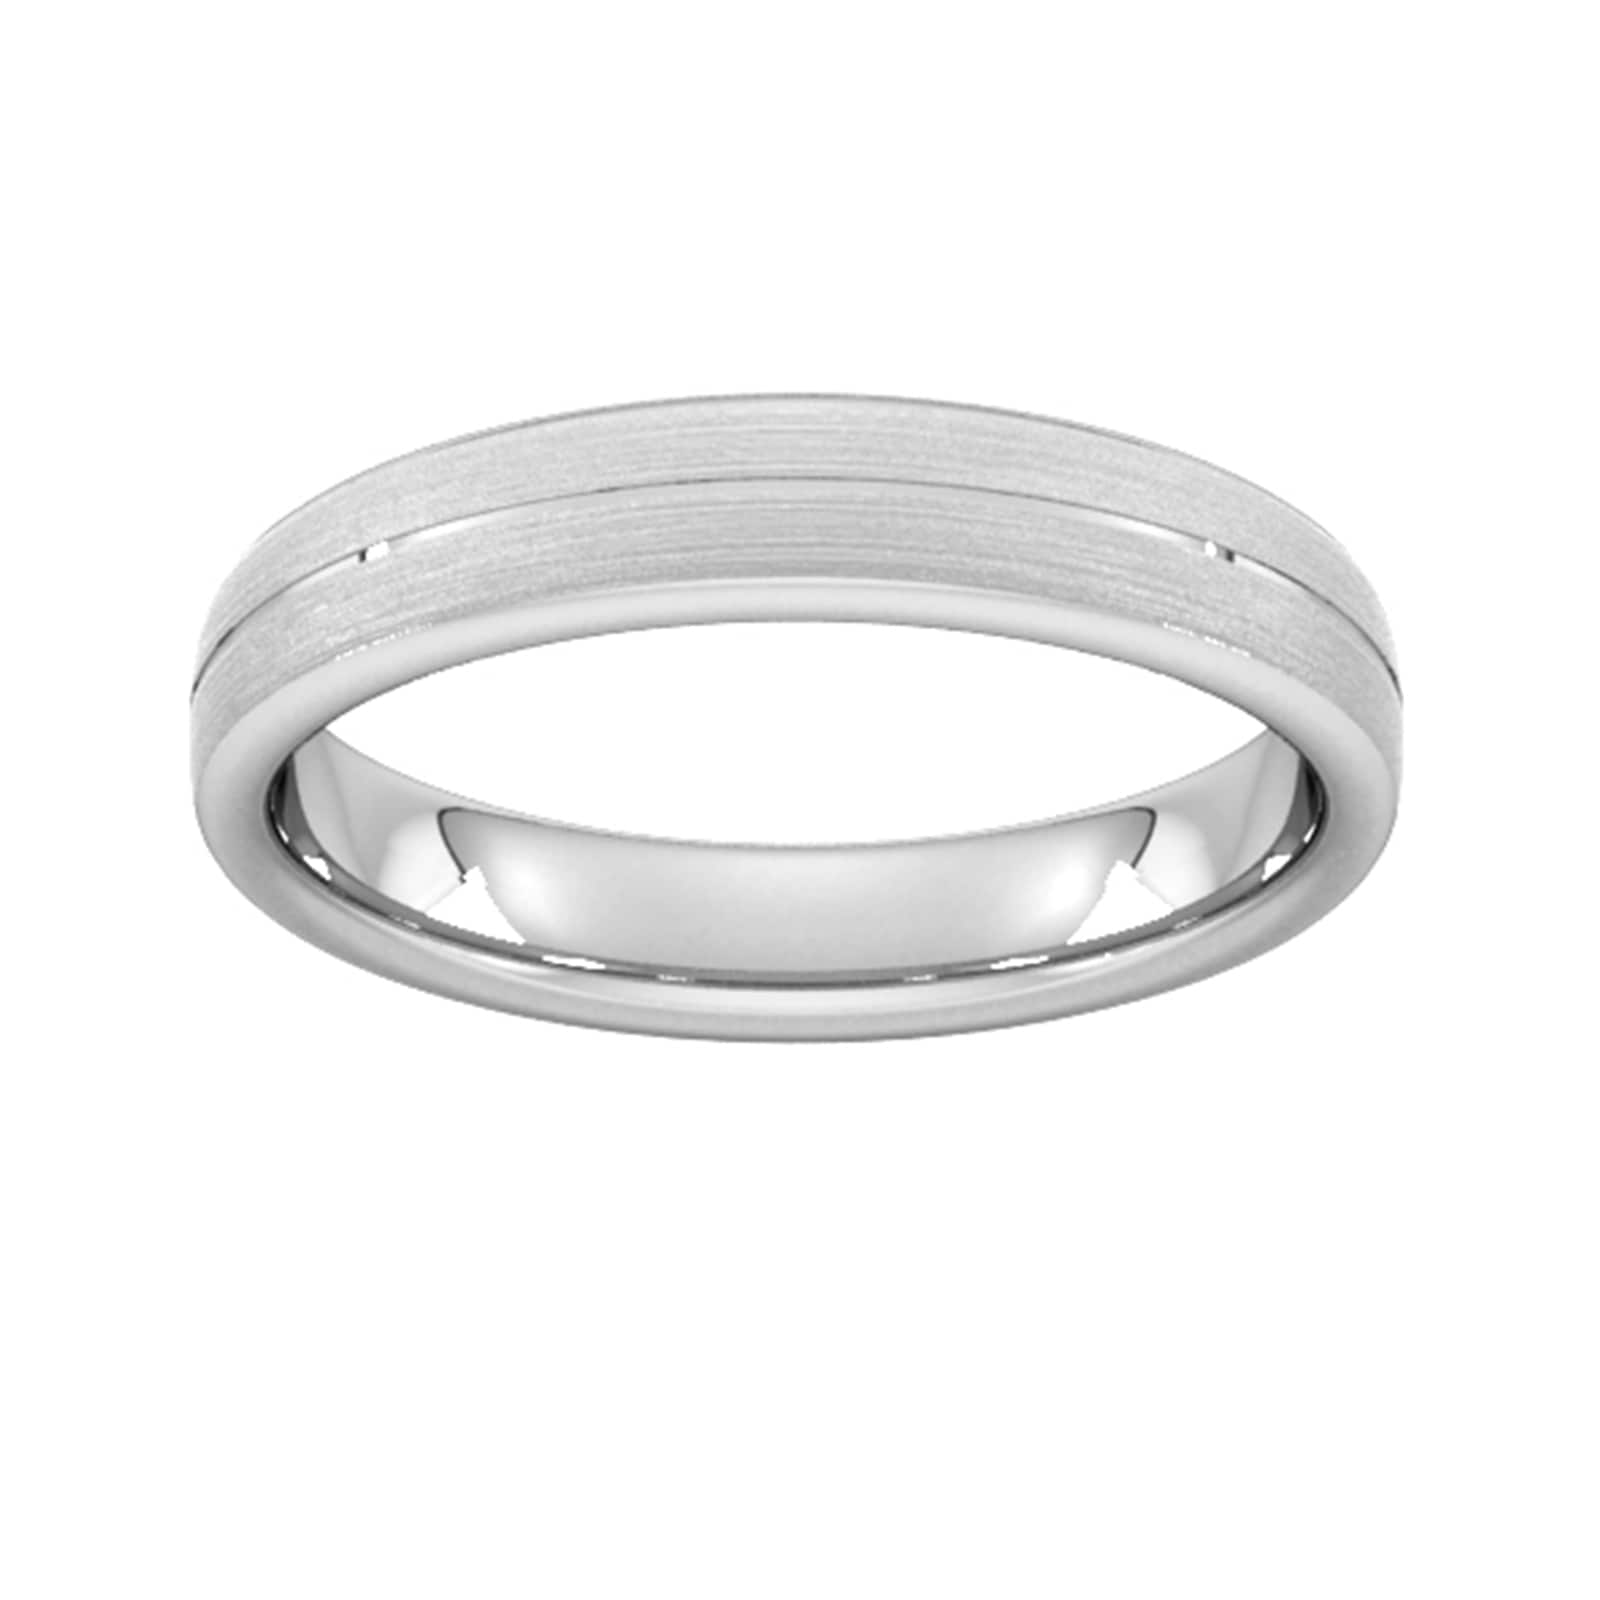 4mm Slight Court Extra Heavy Centre Groove With Chamfered Edge Wedding Ring In 18 Carat White Gold - Ring Size K